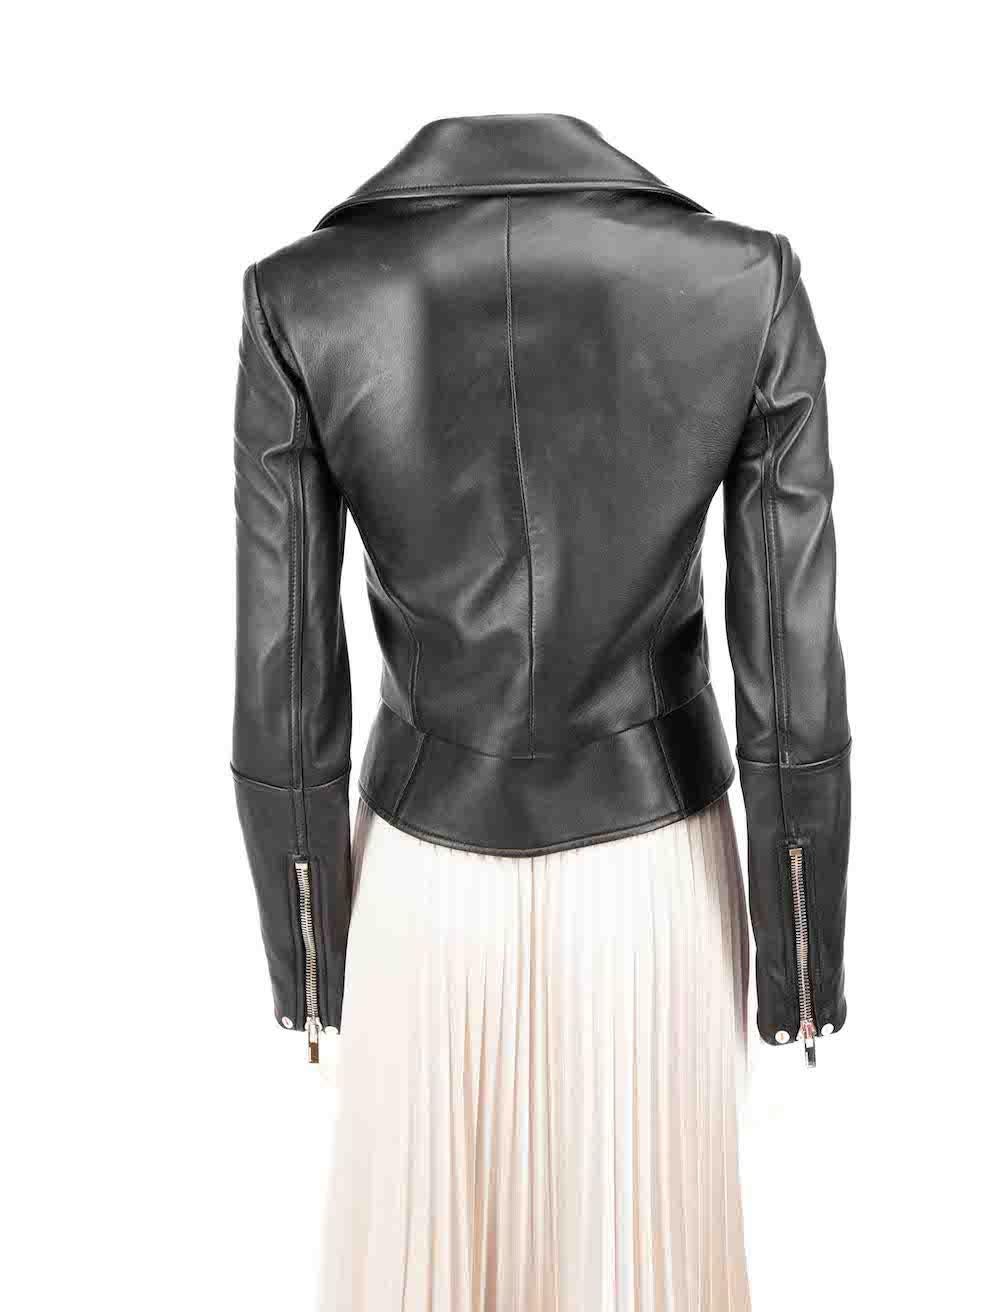 Balenciaga Black Leather Zip Up Biker Jacket Size S In Good Condition For Sale In London, GB